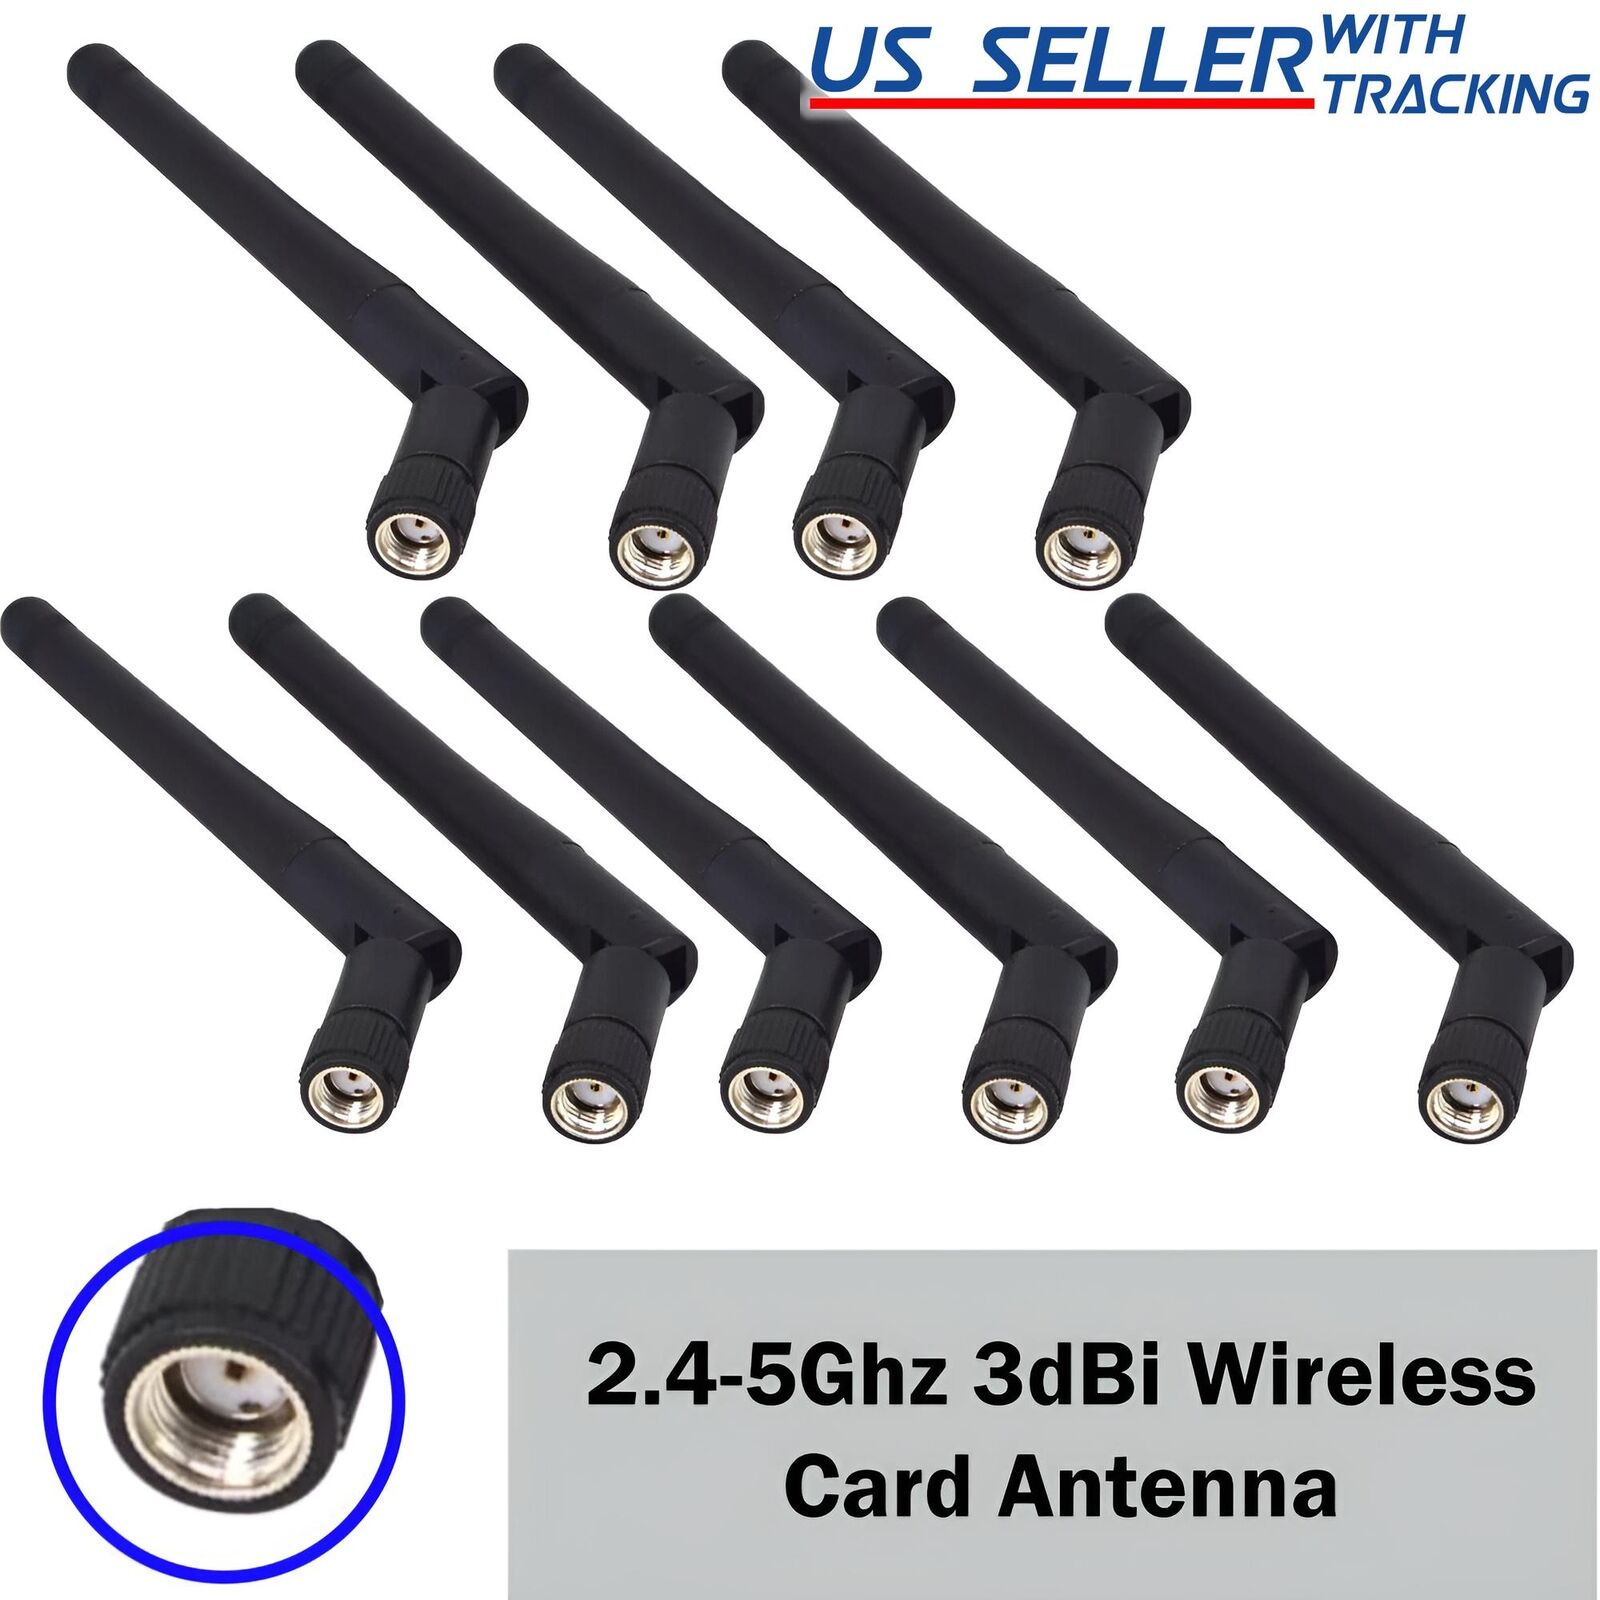 10 Pack RP-SMA Antenna for WiFi 2.4GHz/5Ghz Wireless Card Router